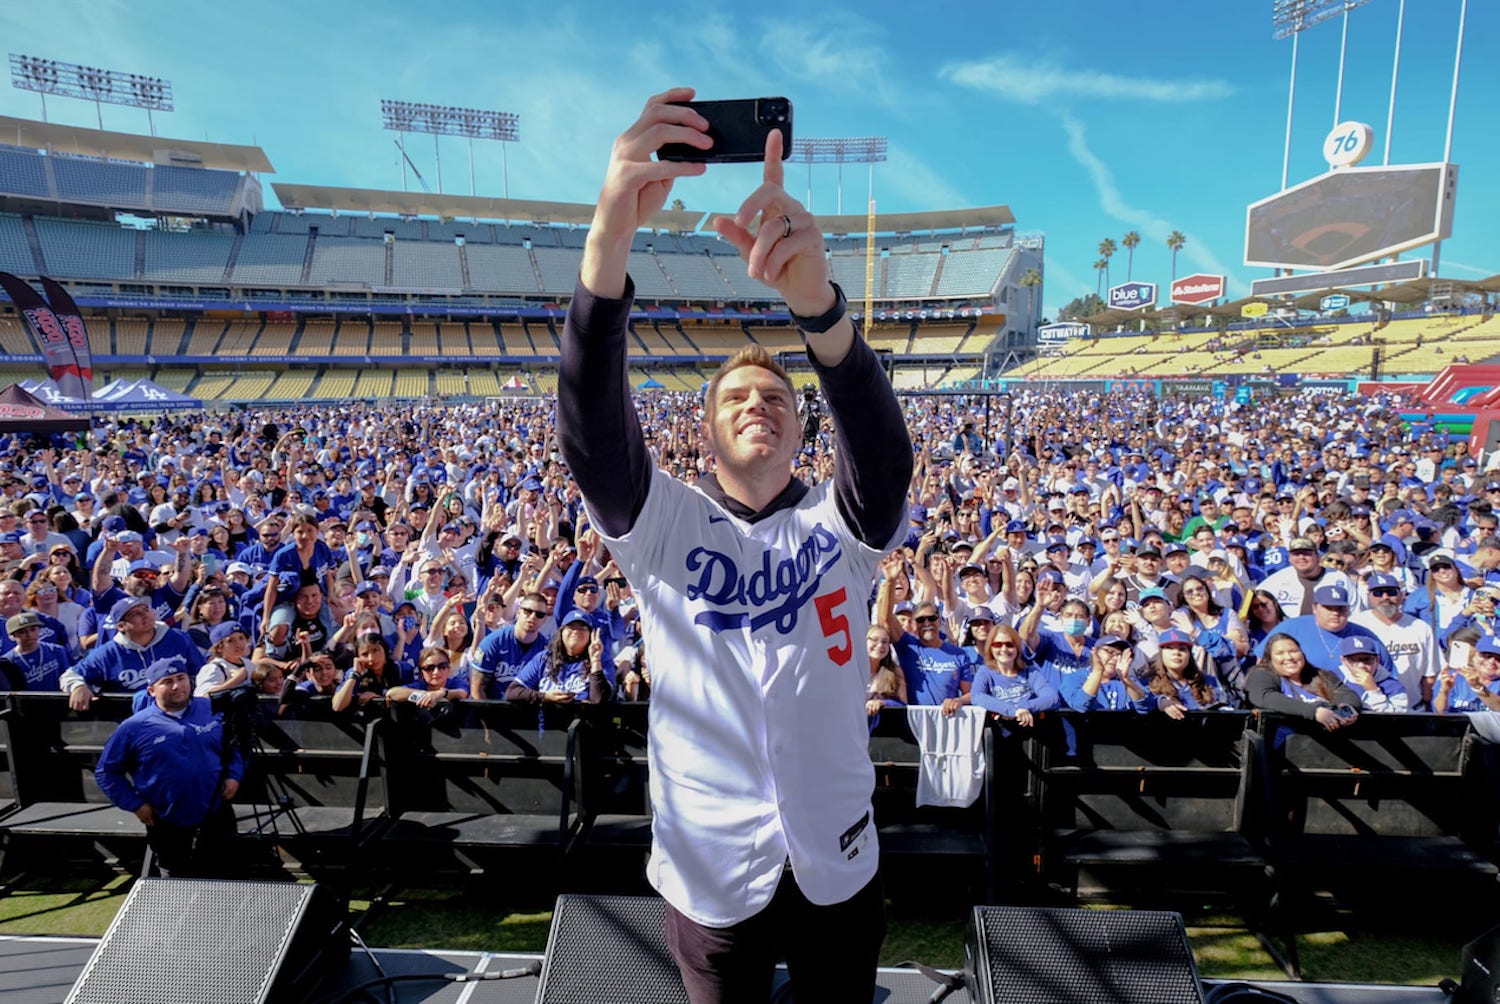 Person taking a photo with a crowd in a Dodgers shirt in Dodgers stadium